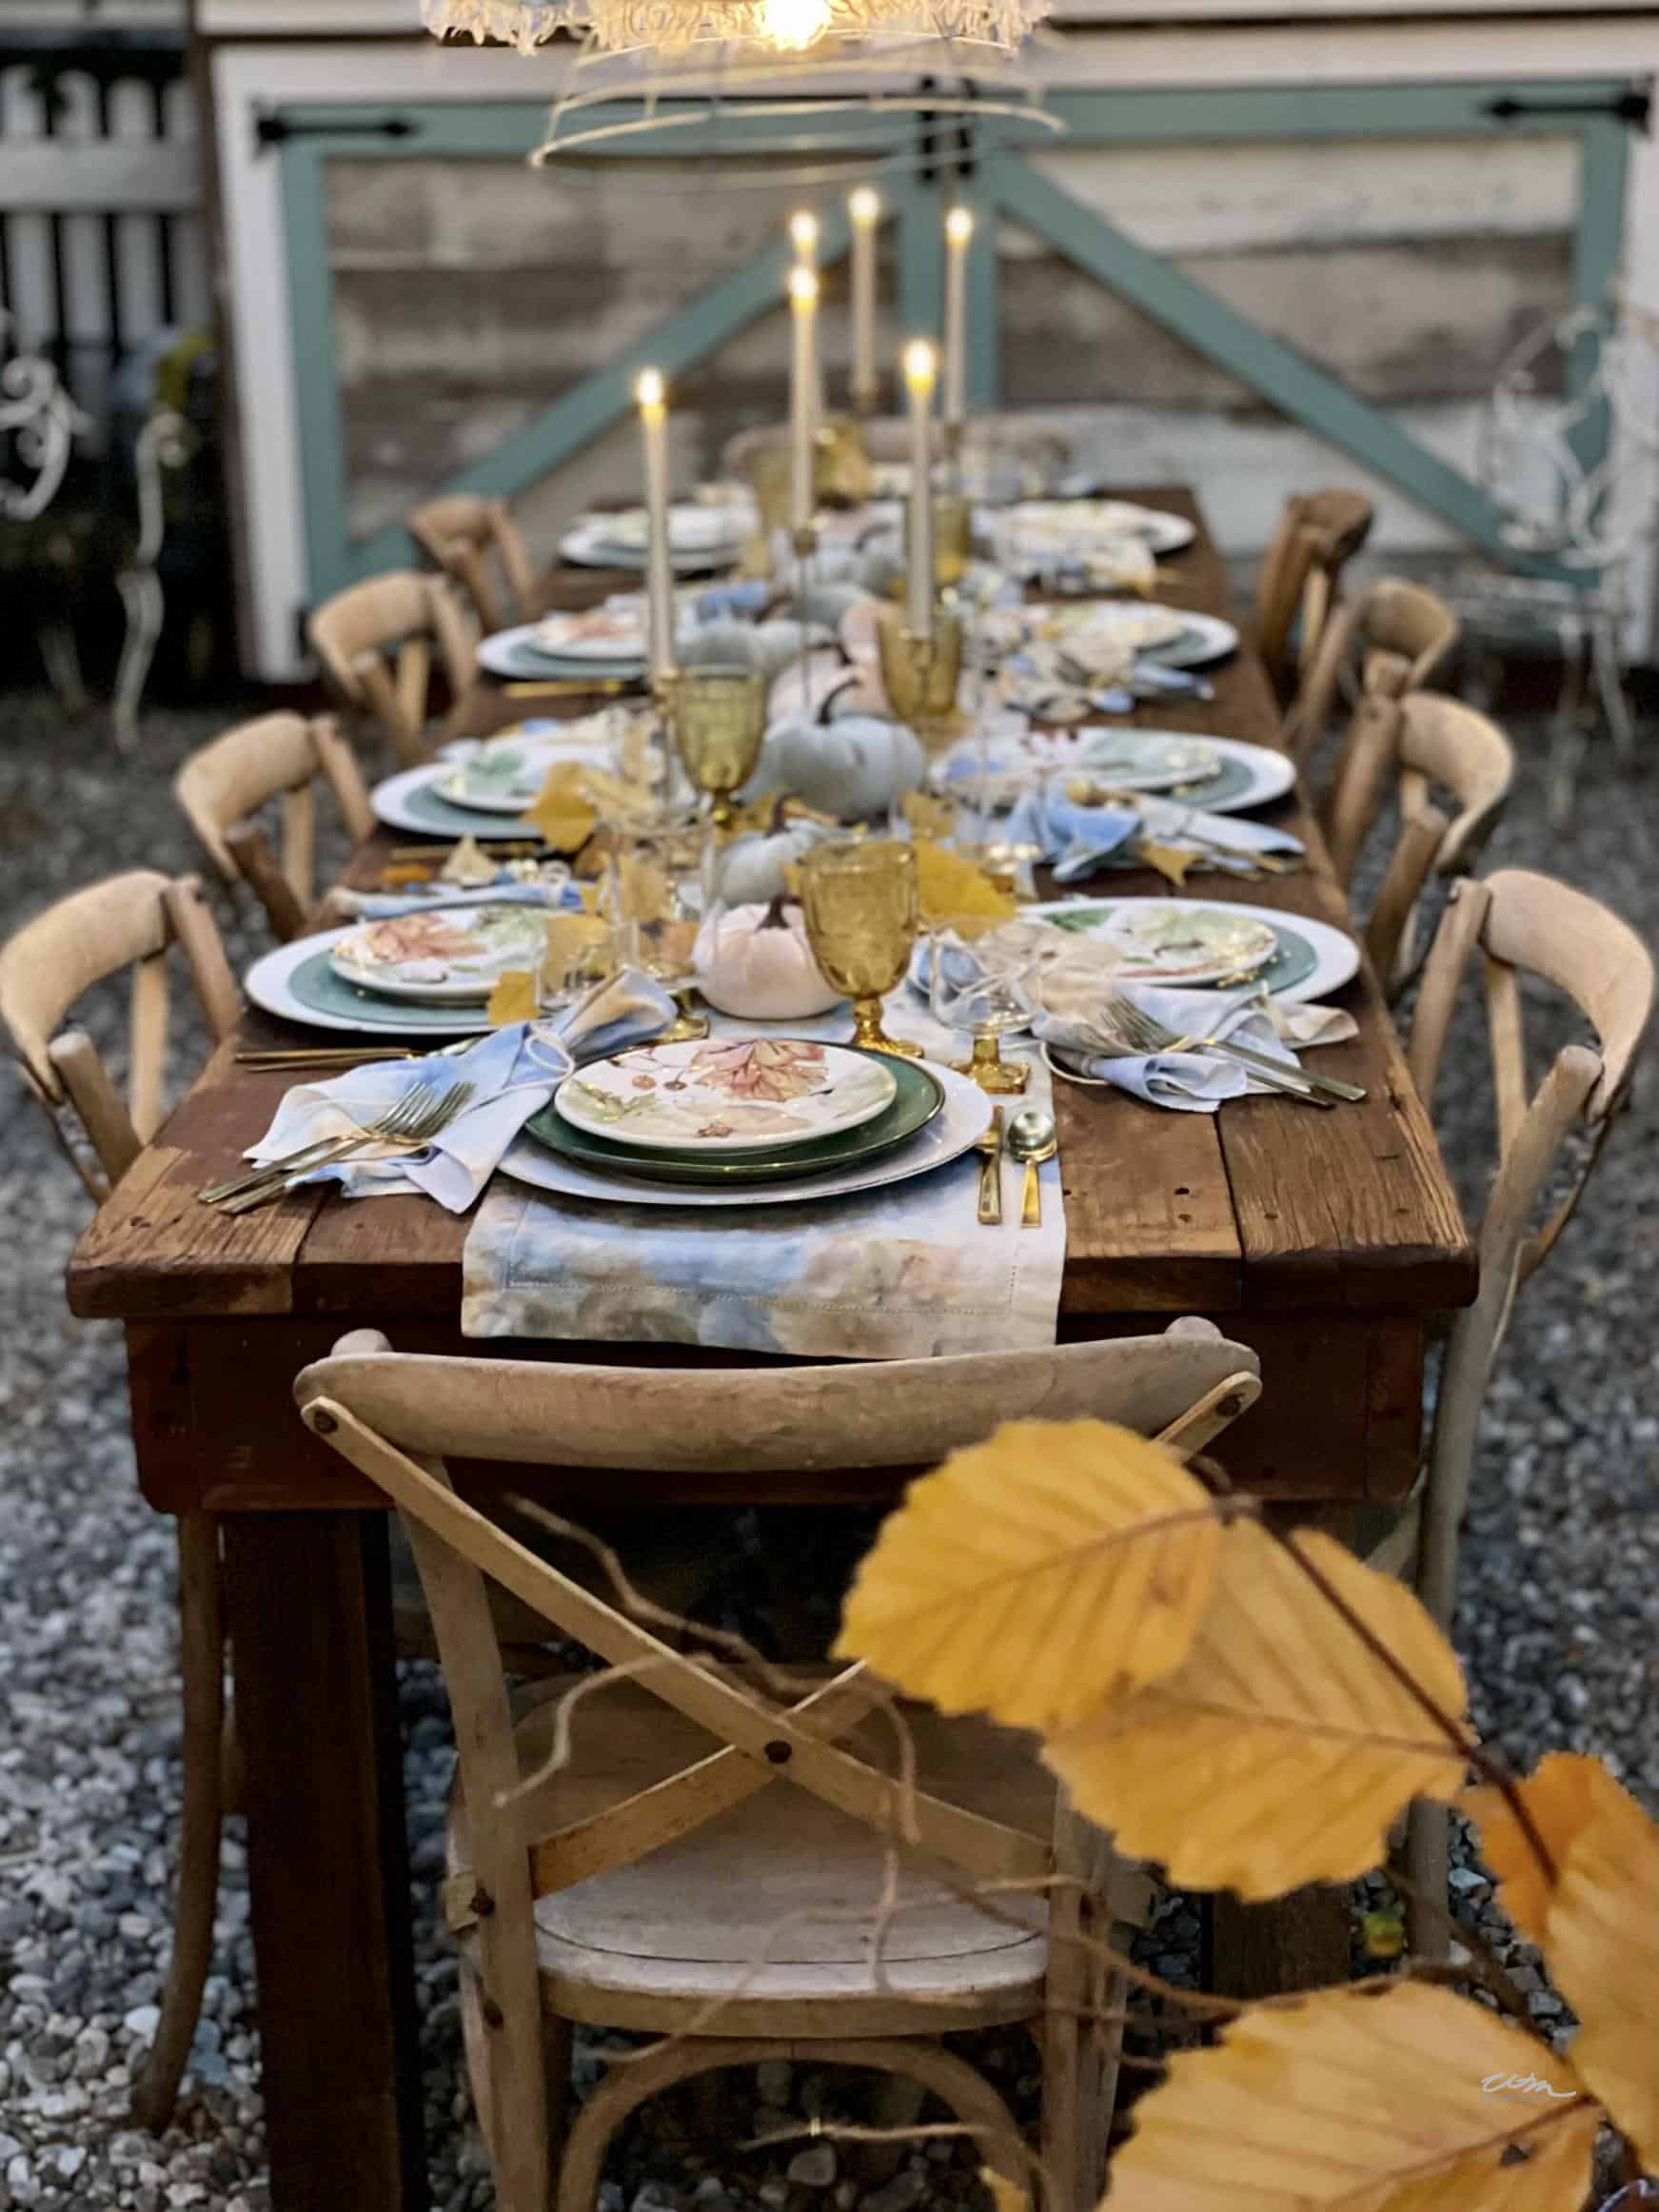 The Most Beautiful and Cozy Outdoor Fall Table Decor